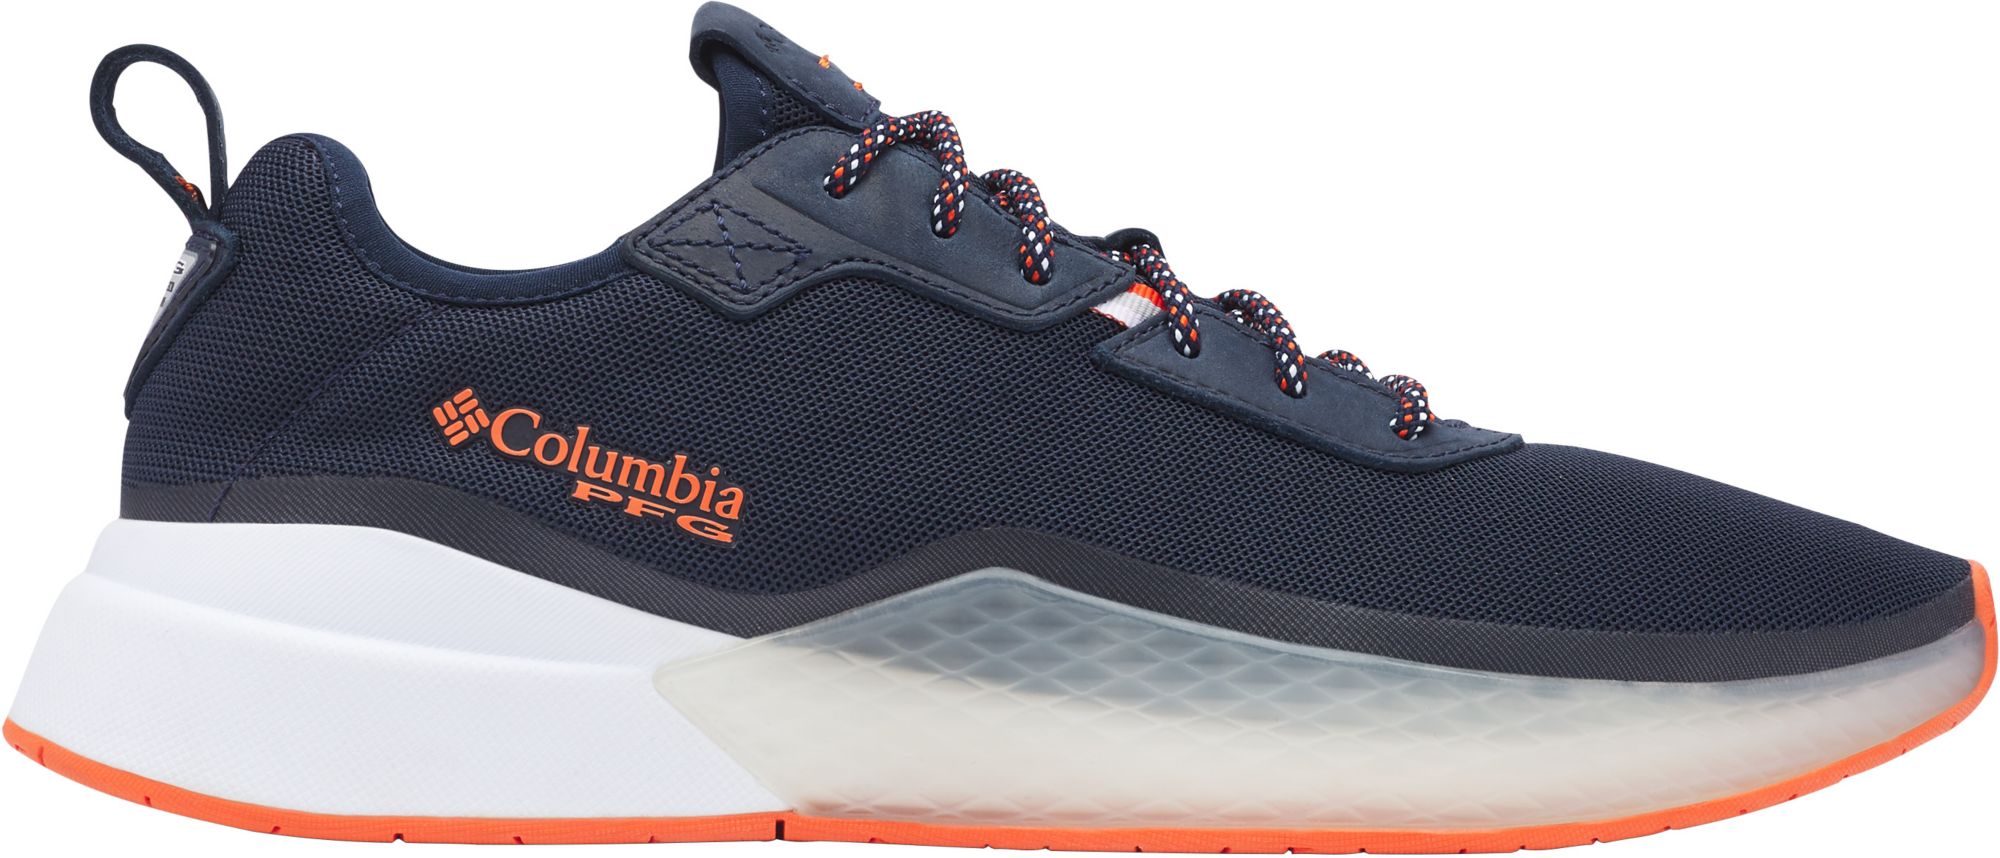 columbia casual shoes